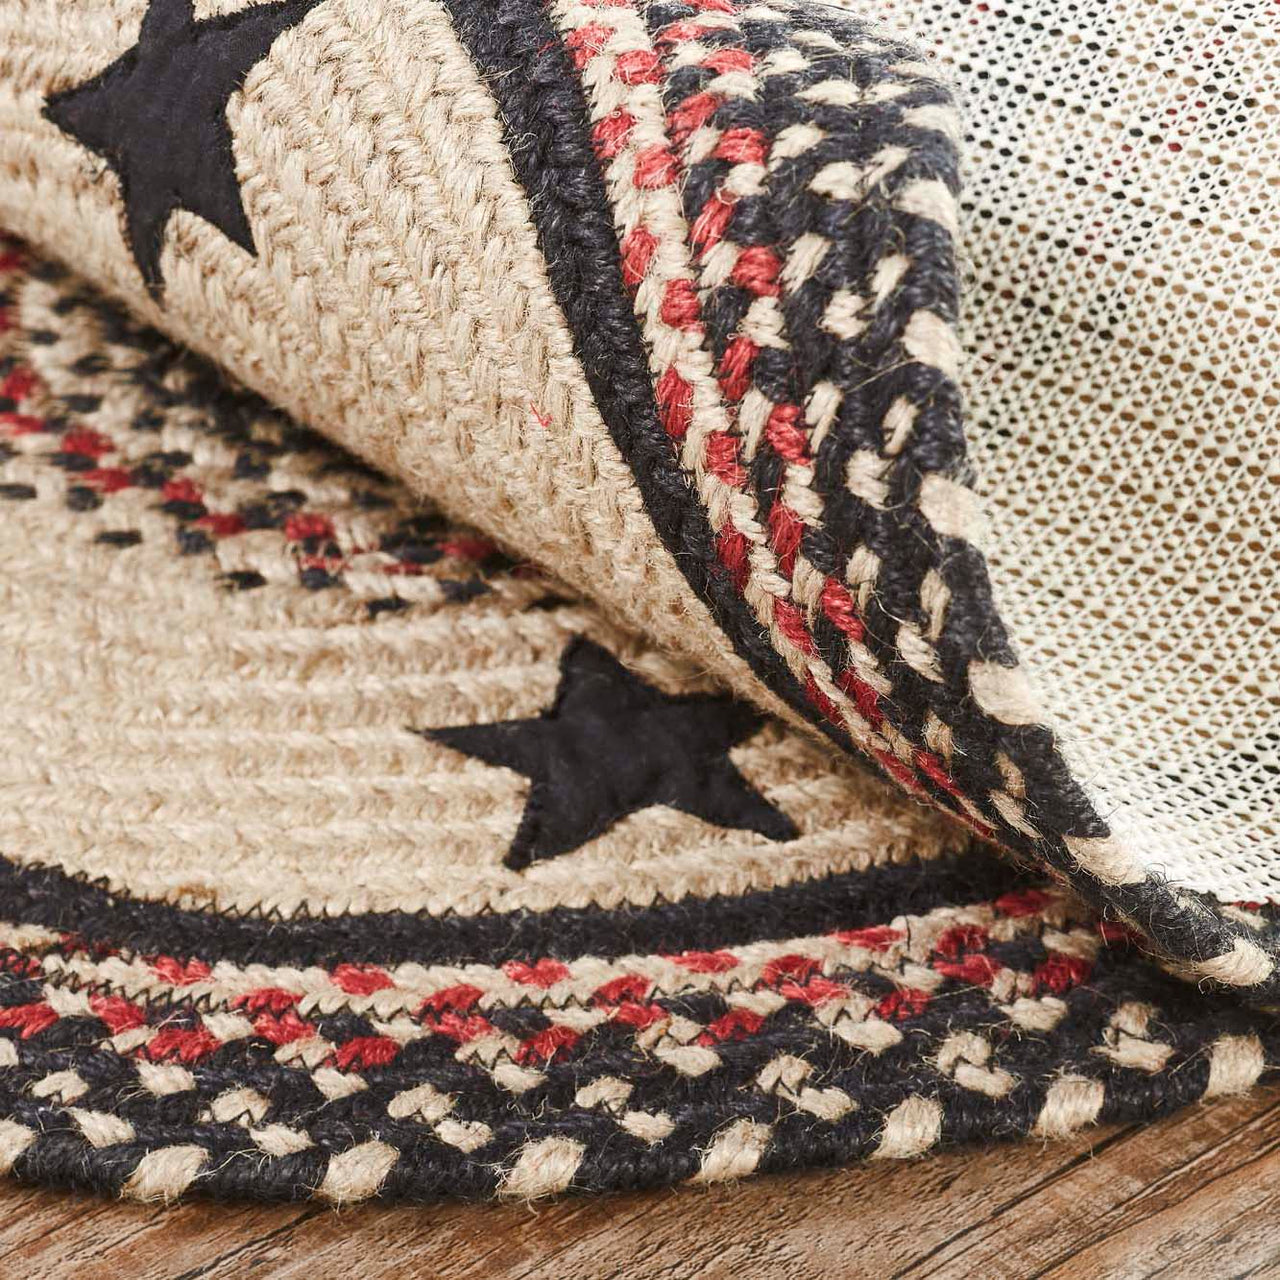 Colonial Star Jute Braided Rug Oval with Rug Pad 4'x6' VHC Brands